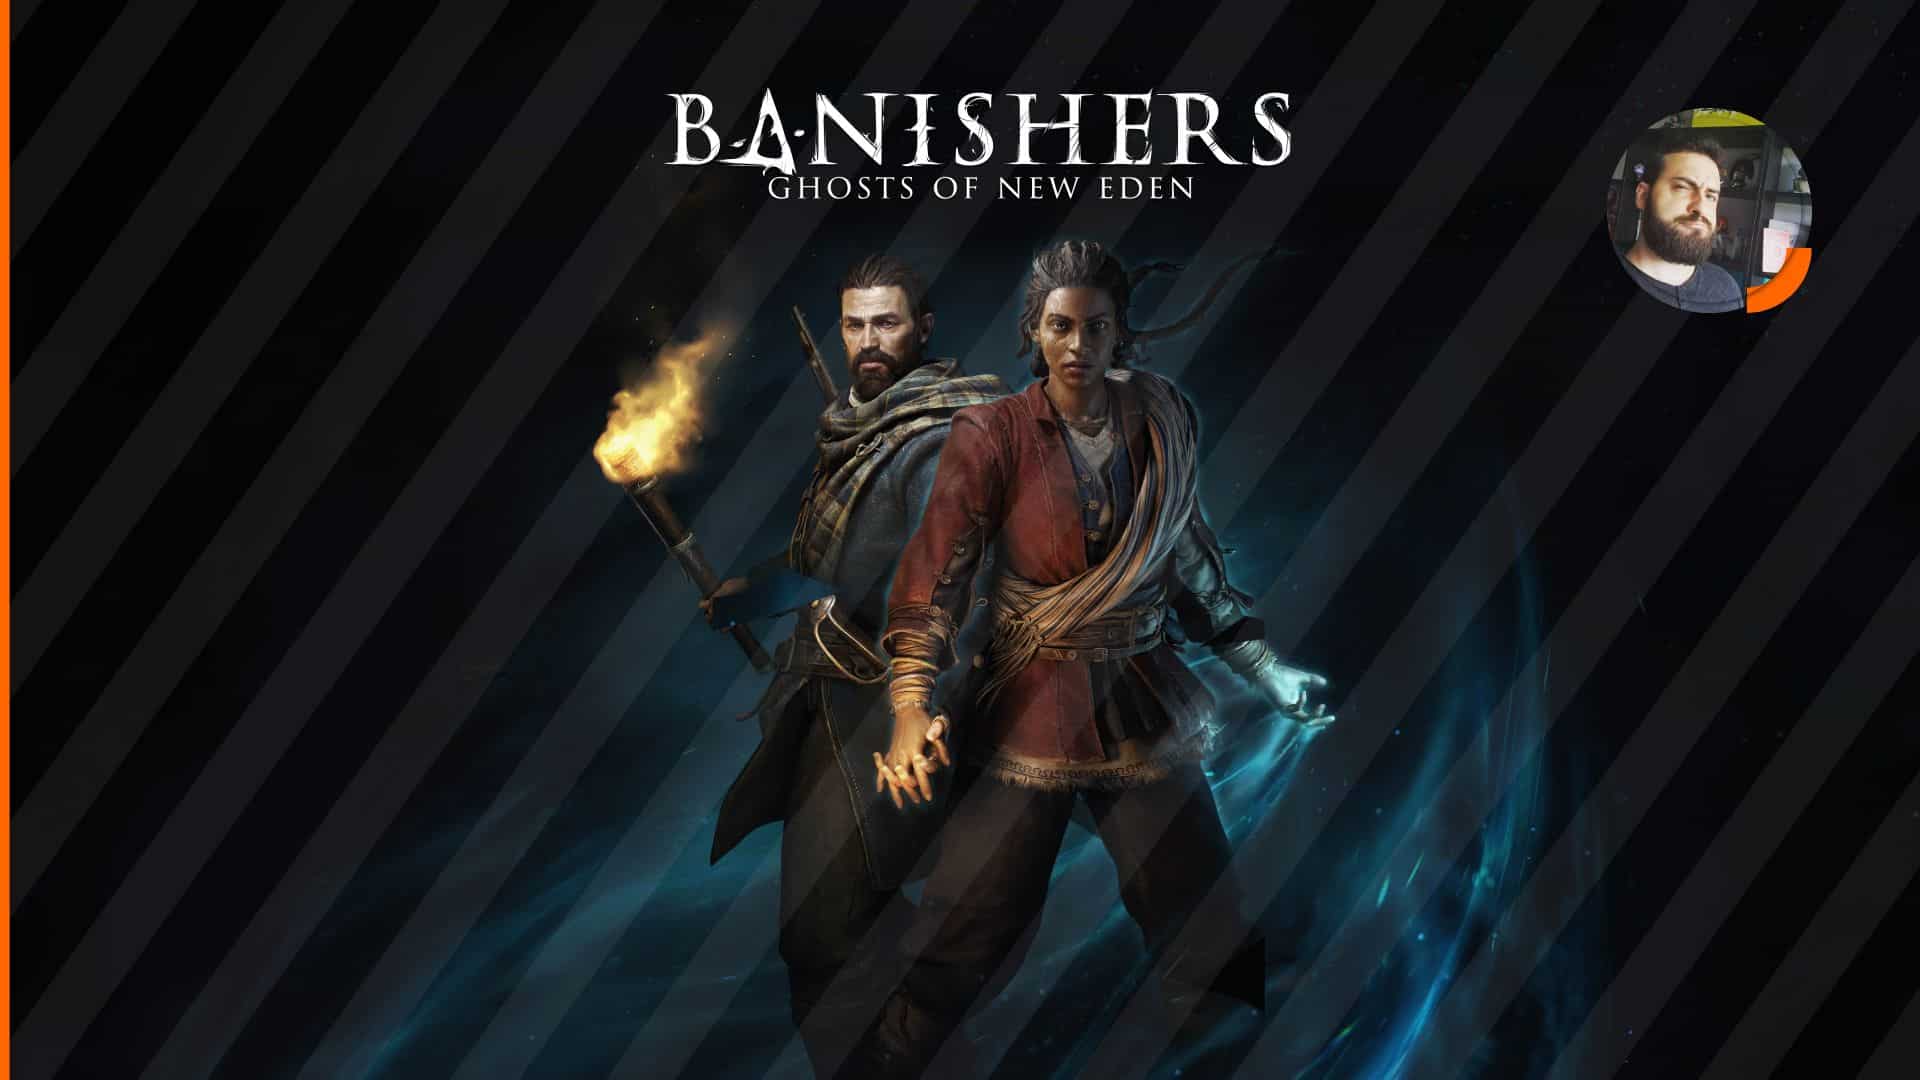 Review Final: Banishers